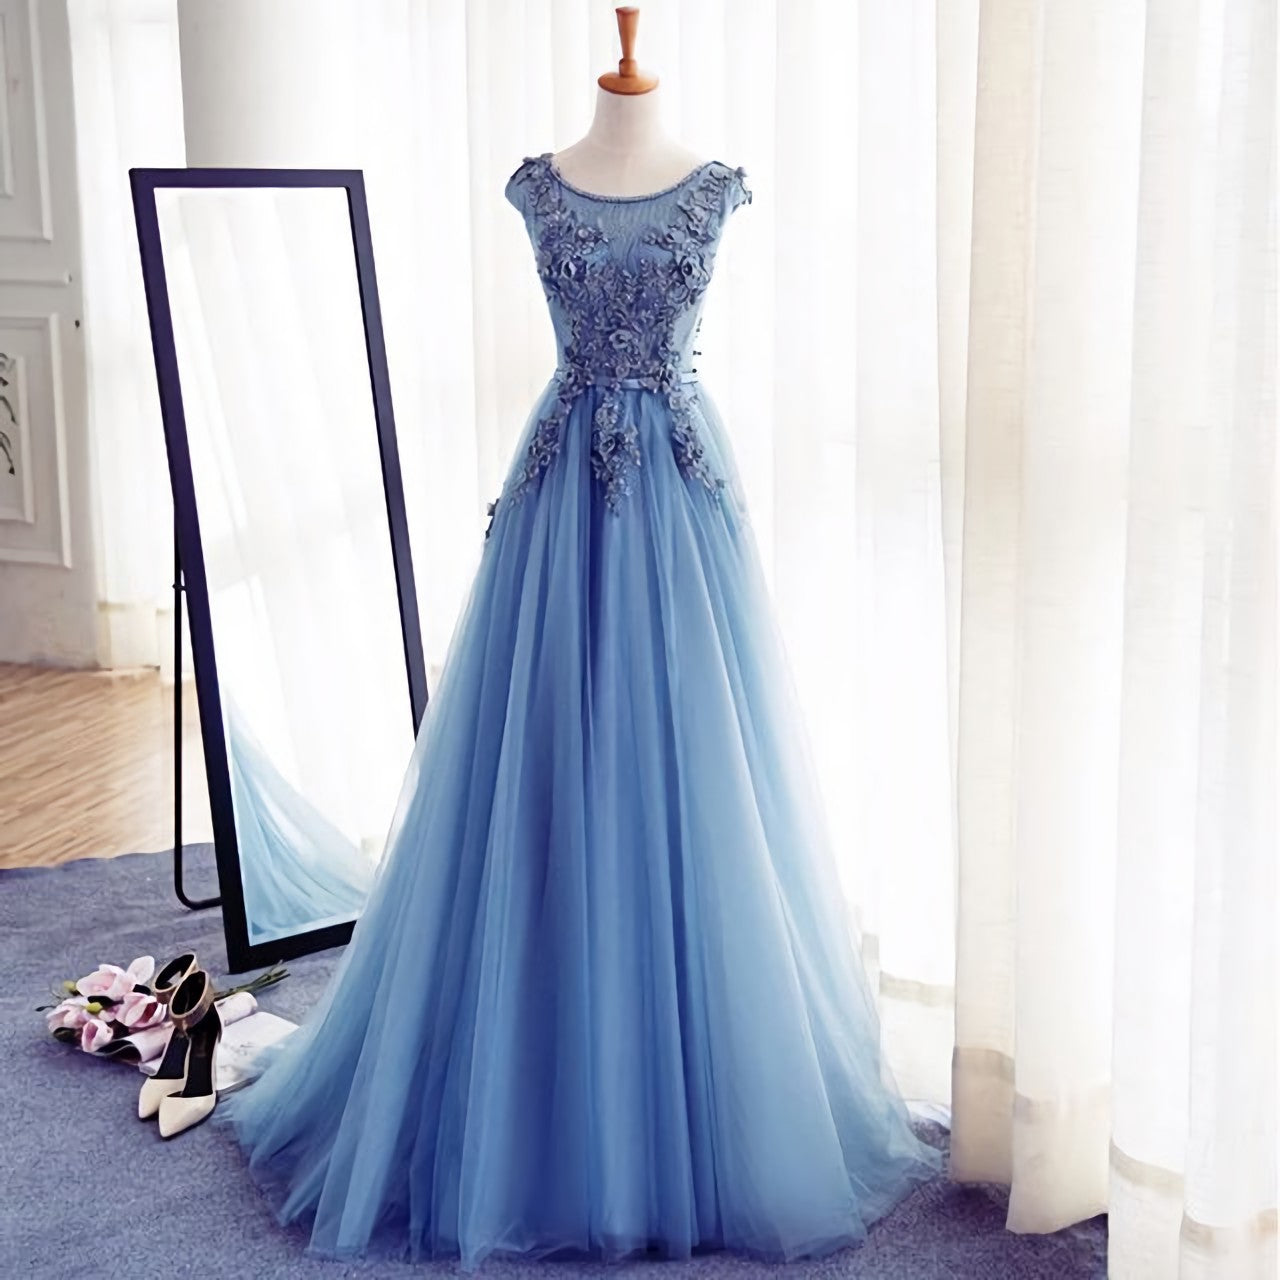 Homecomming Dresses Bodycon, Appliques A Line Prom Dresses, Long Prom Dresses, Cheap Prom Dresses, Evening Dress, Prom Gowns Formal Women Dress, Prom Dress